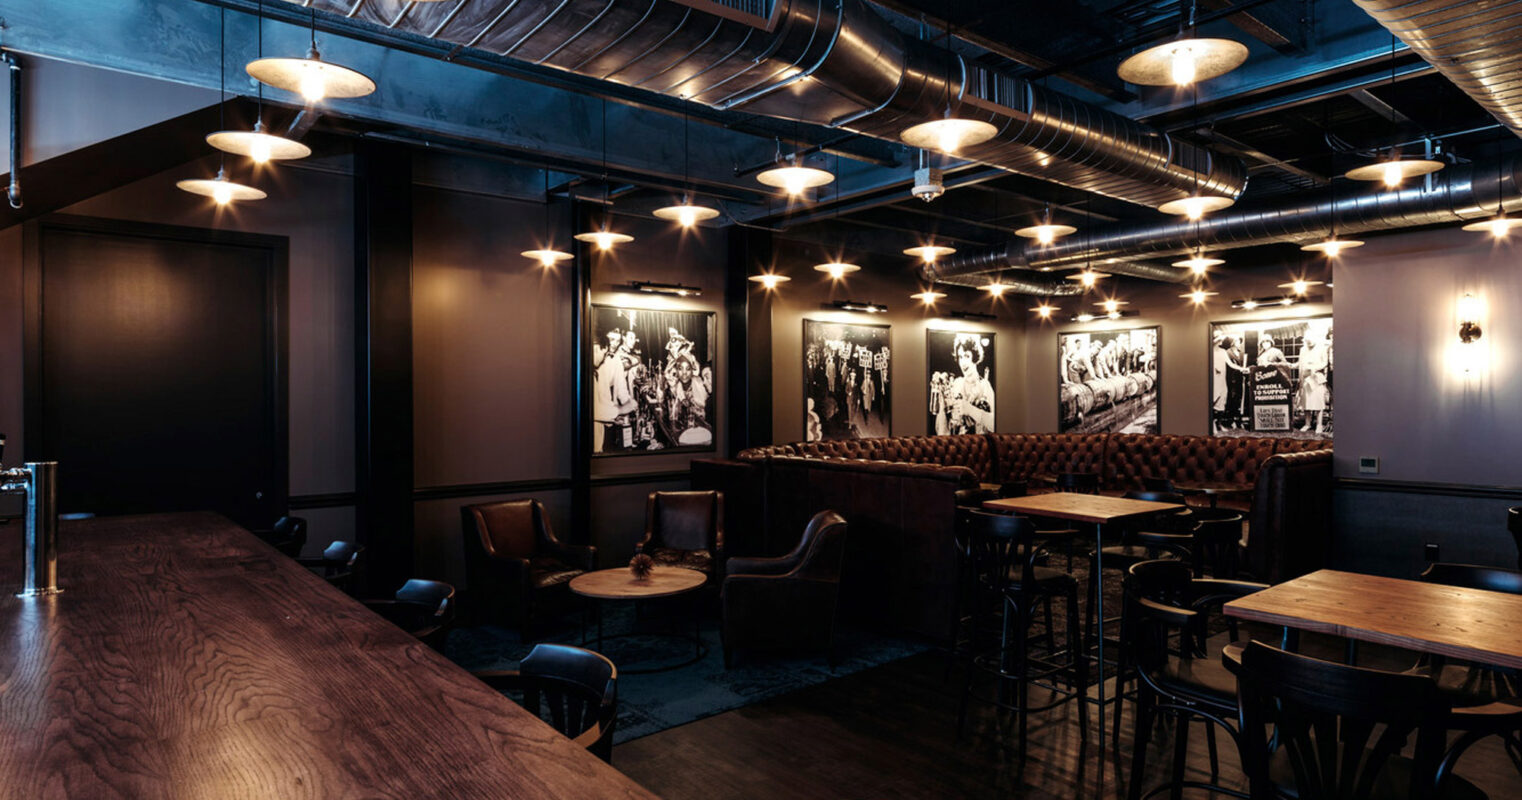 Sophisticated lounge area featuring dark wood tones and leather seating. Exposed ductwork on the ceiling contributes to the industrial-chic ambiance, while round pendant lights add warmth. Monochrome photographs line the walls, complementing the elegant, moody aesthetic.